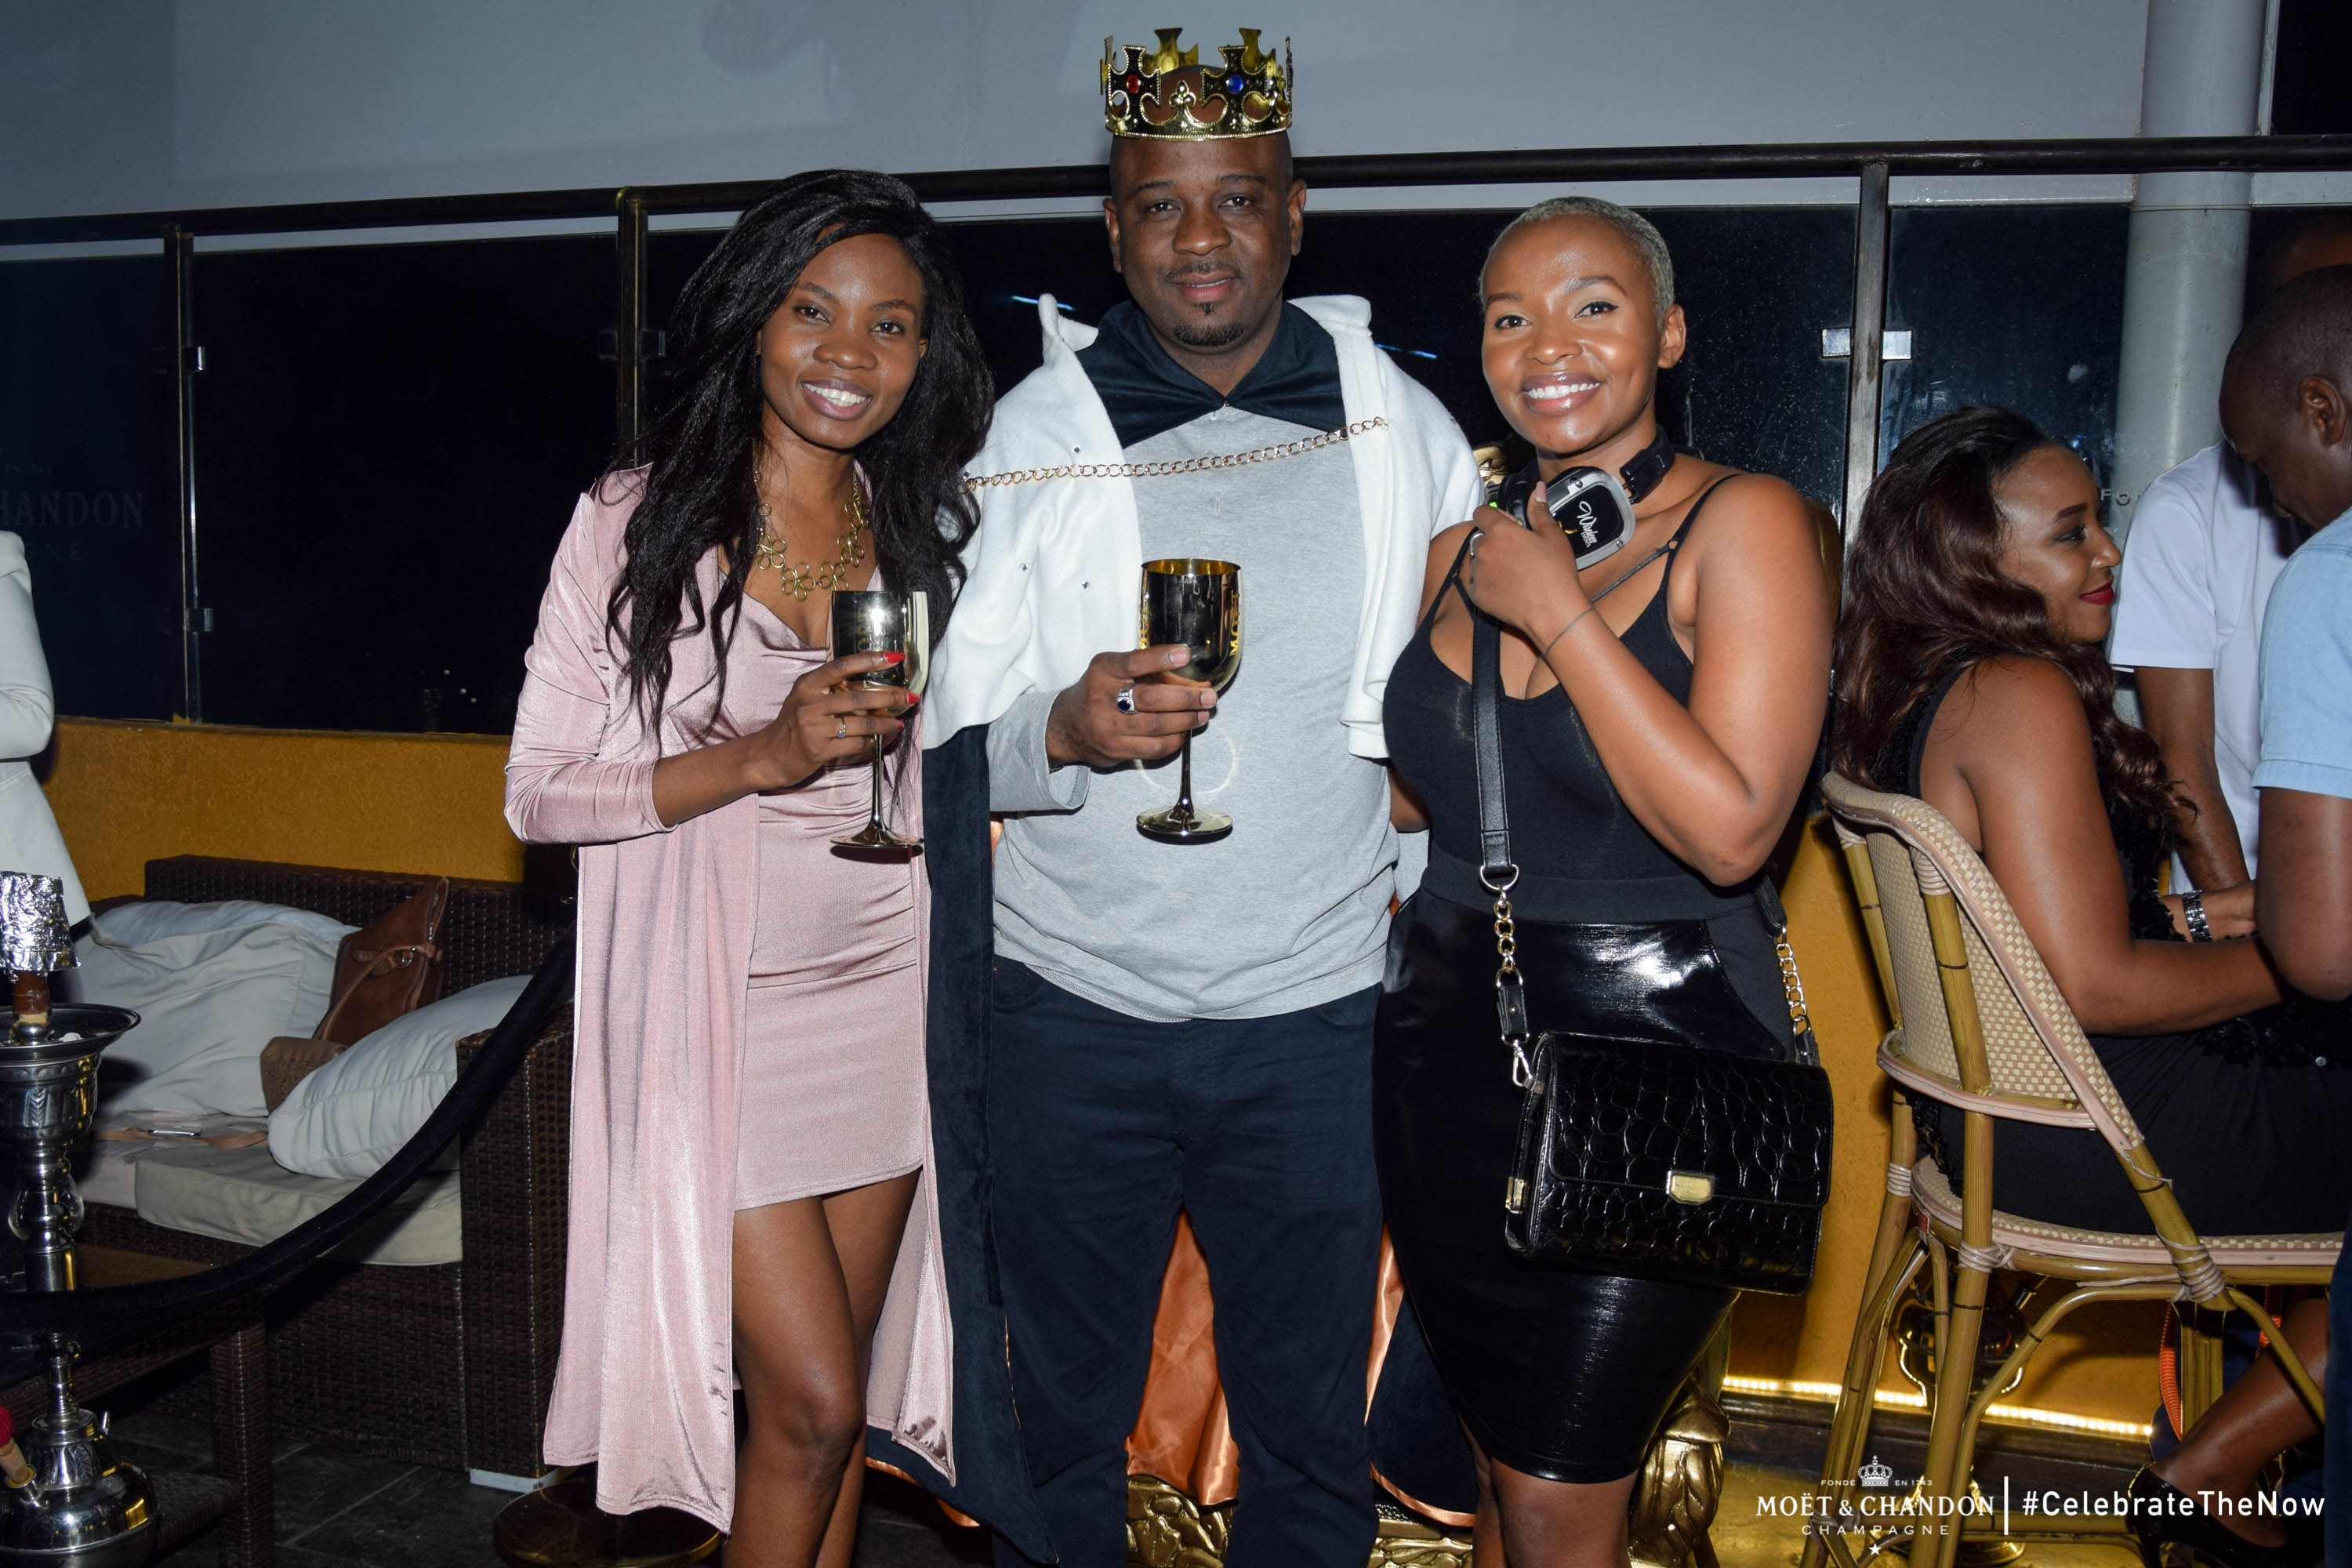 Celebrate the now Ali Oumarou crowned as the first Moët King